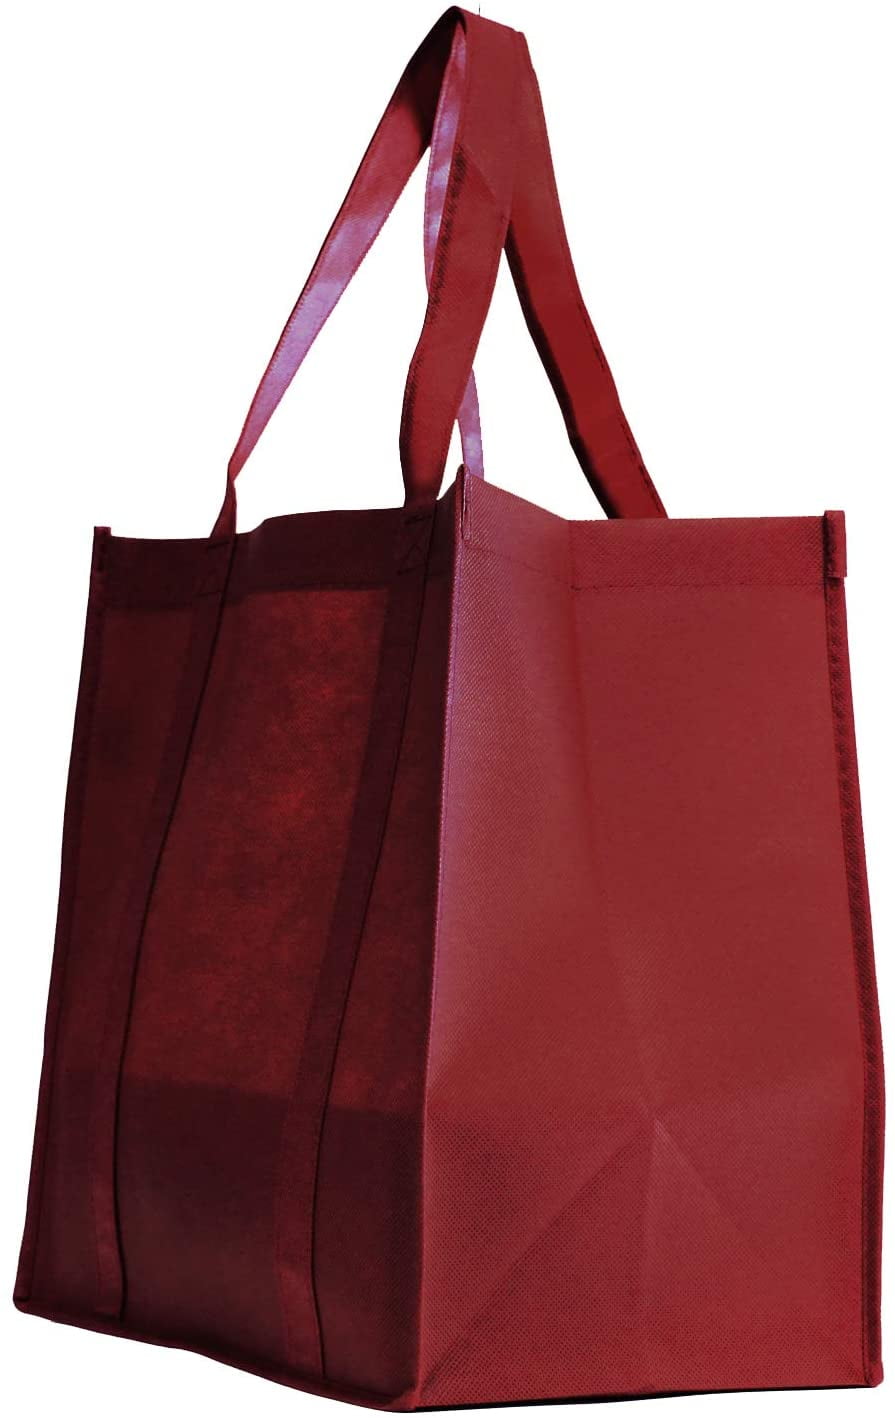 Red Shopping Bag with Zipper Jumbo Grocery Tote Reusable Eco Friendly Large Bag 